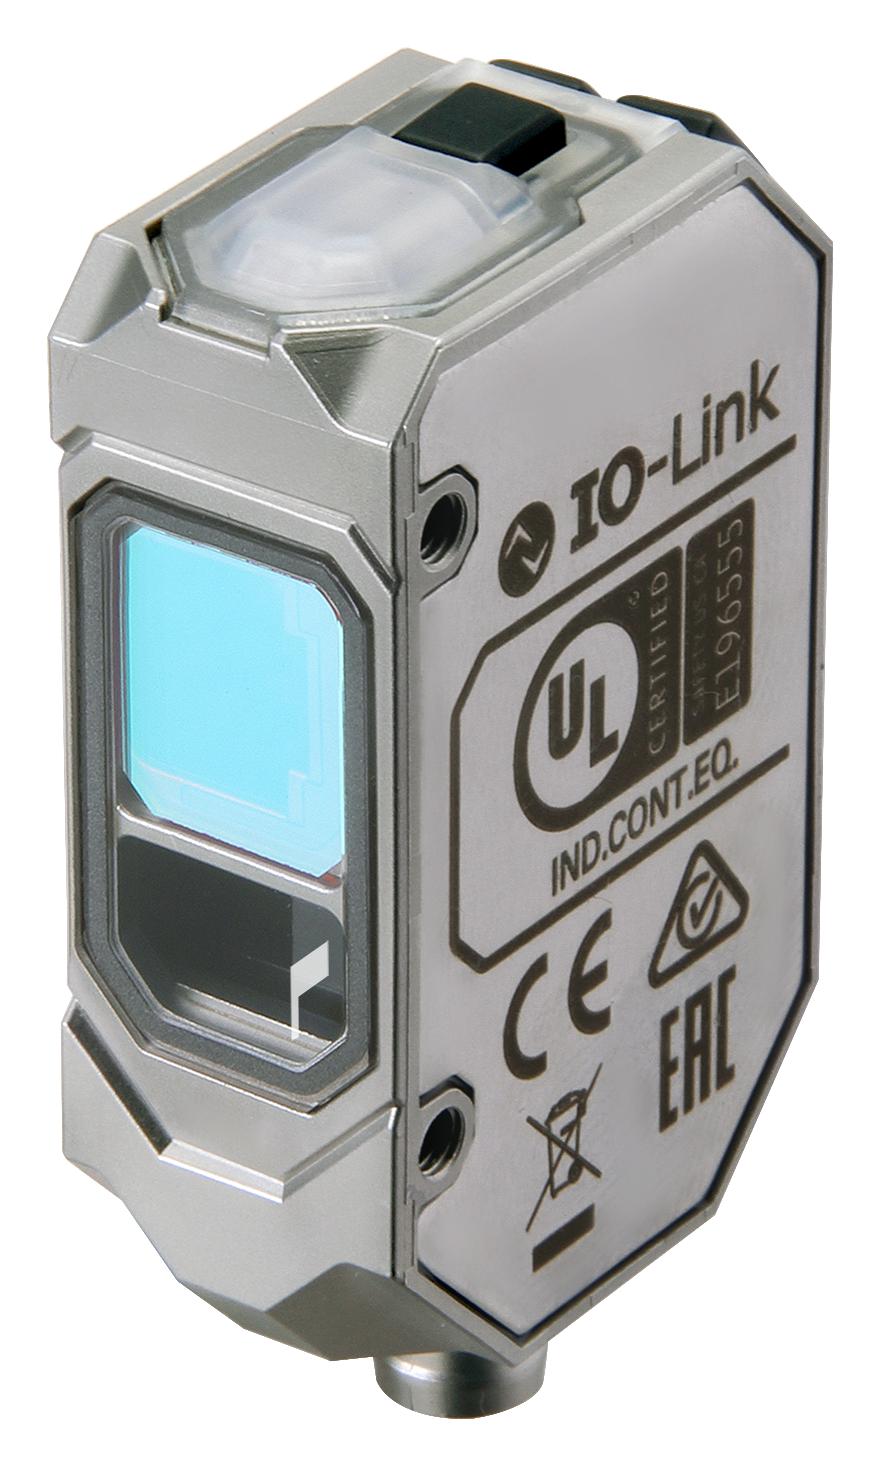 Omron Industrial Automation E3As-Hl150Lmt M3 Photo Sensor, Triangulation, M8, 150mm